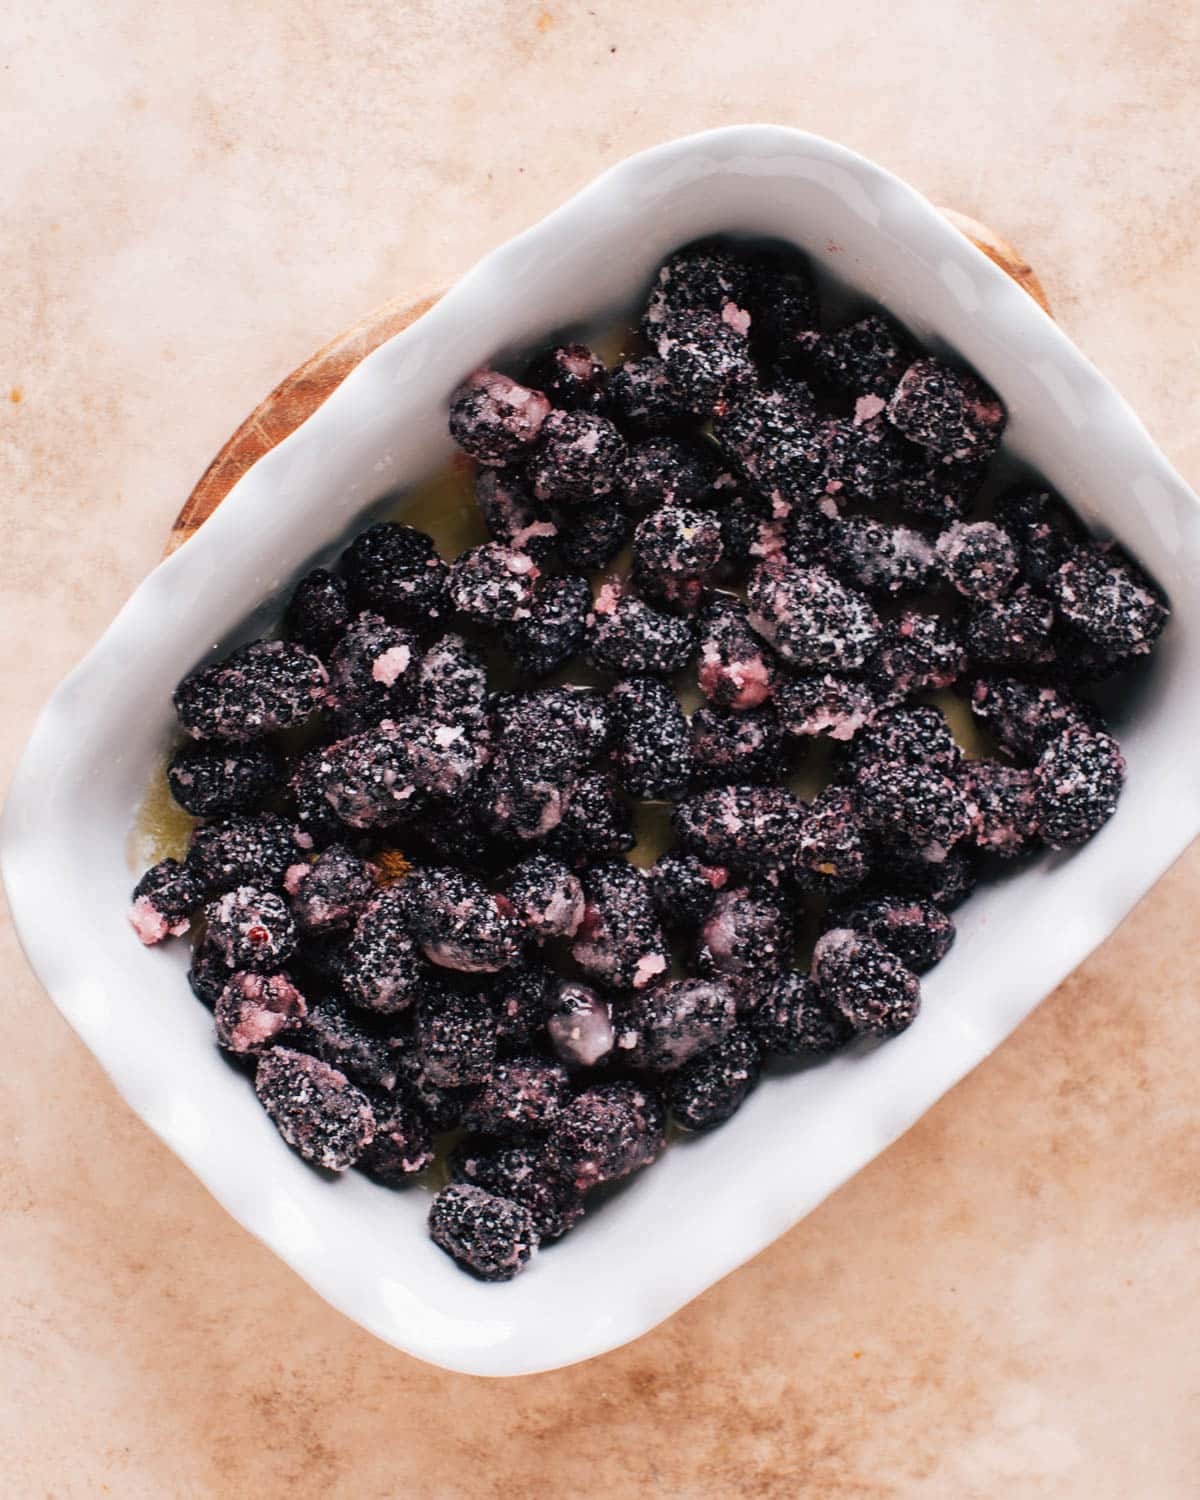 A white baking dish filled with freshly made blackberry filling to make blackberry cobbler.